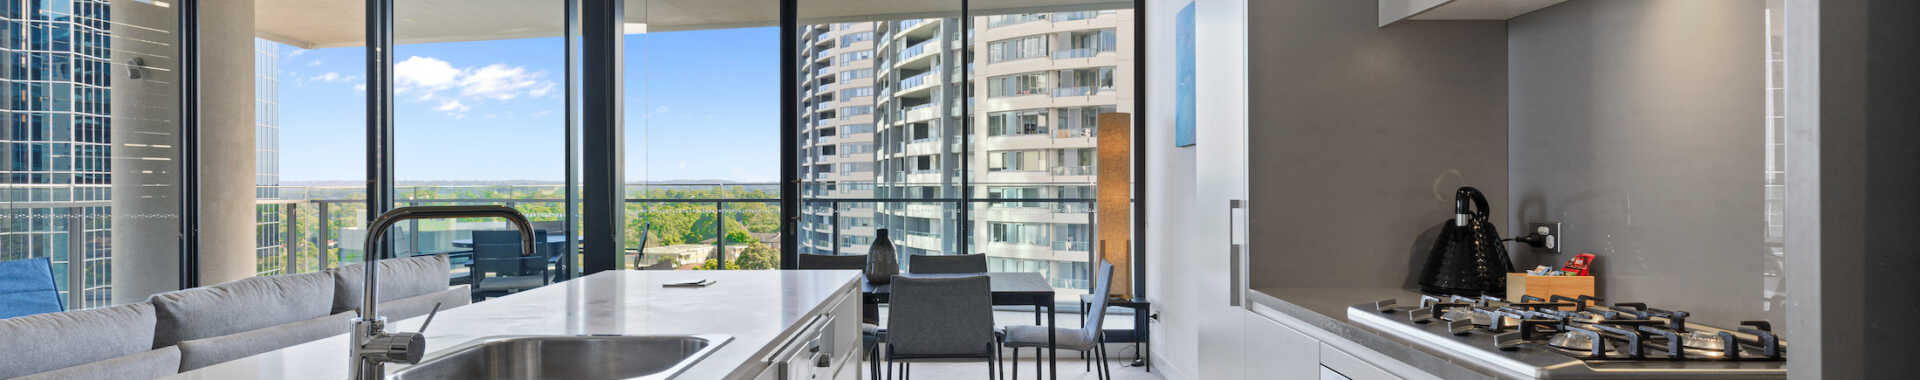 Chatswood Corporate Apartment